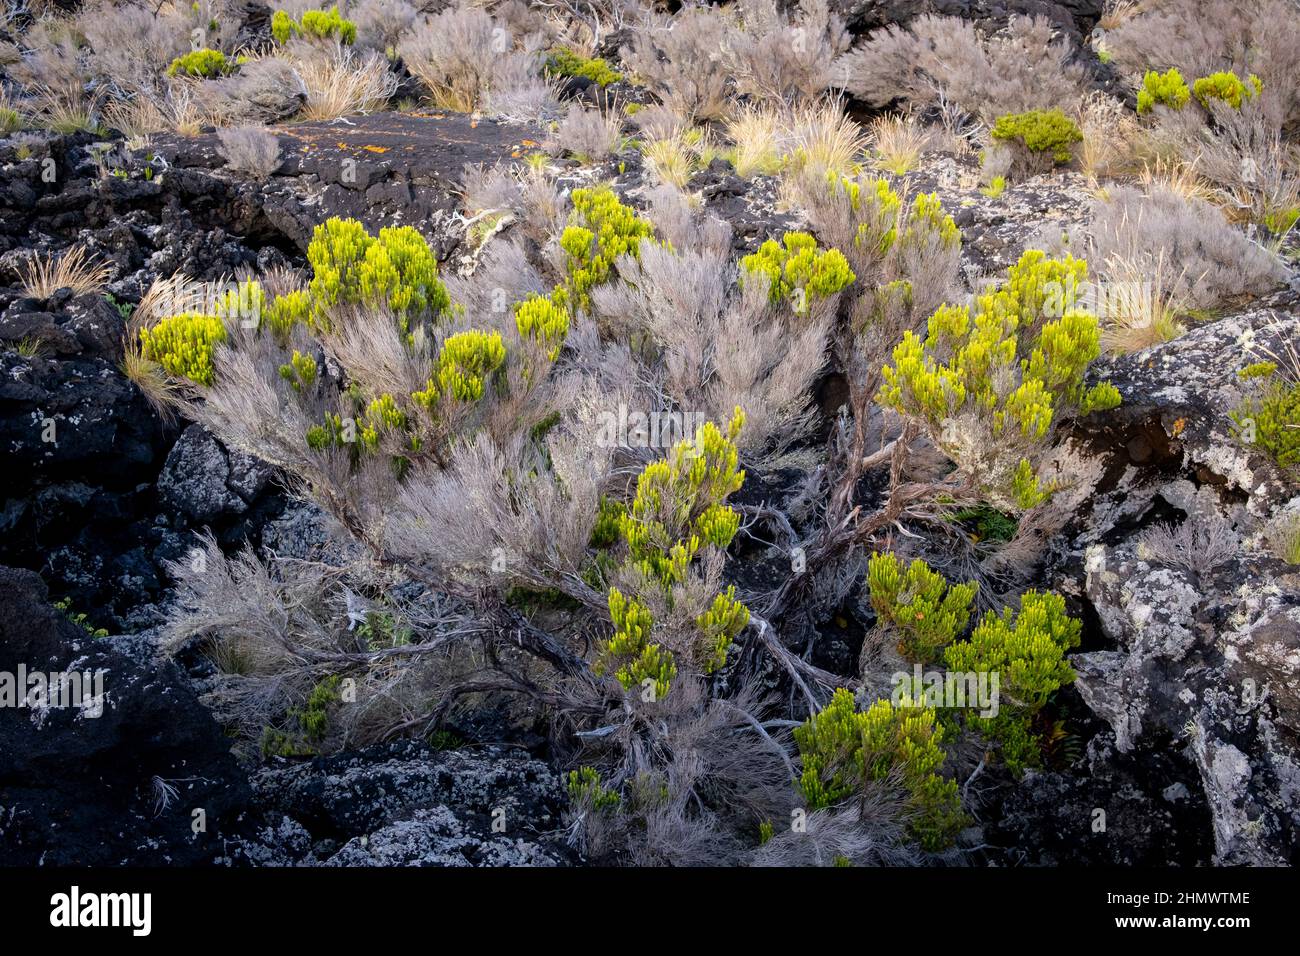 Pico, Portugal - 02 August 2021 : Heath growing from a lava field Stock Photo